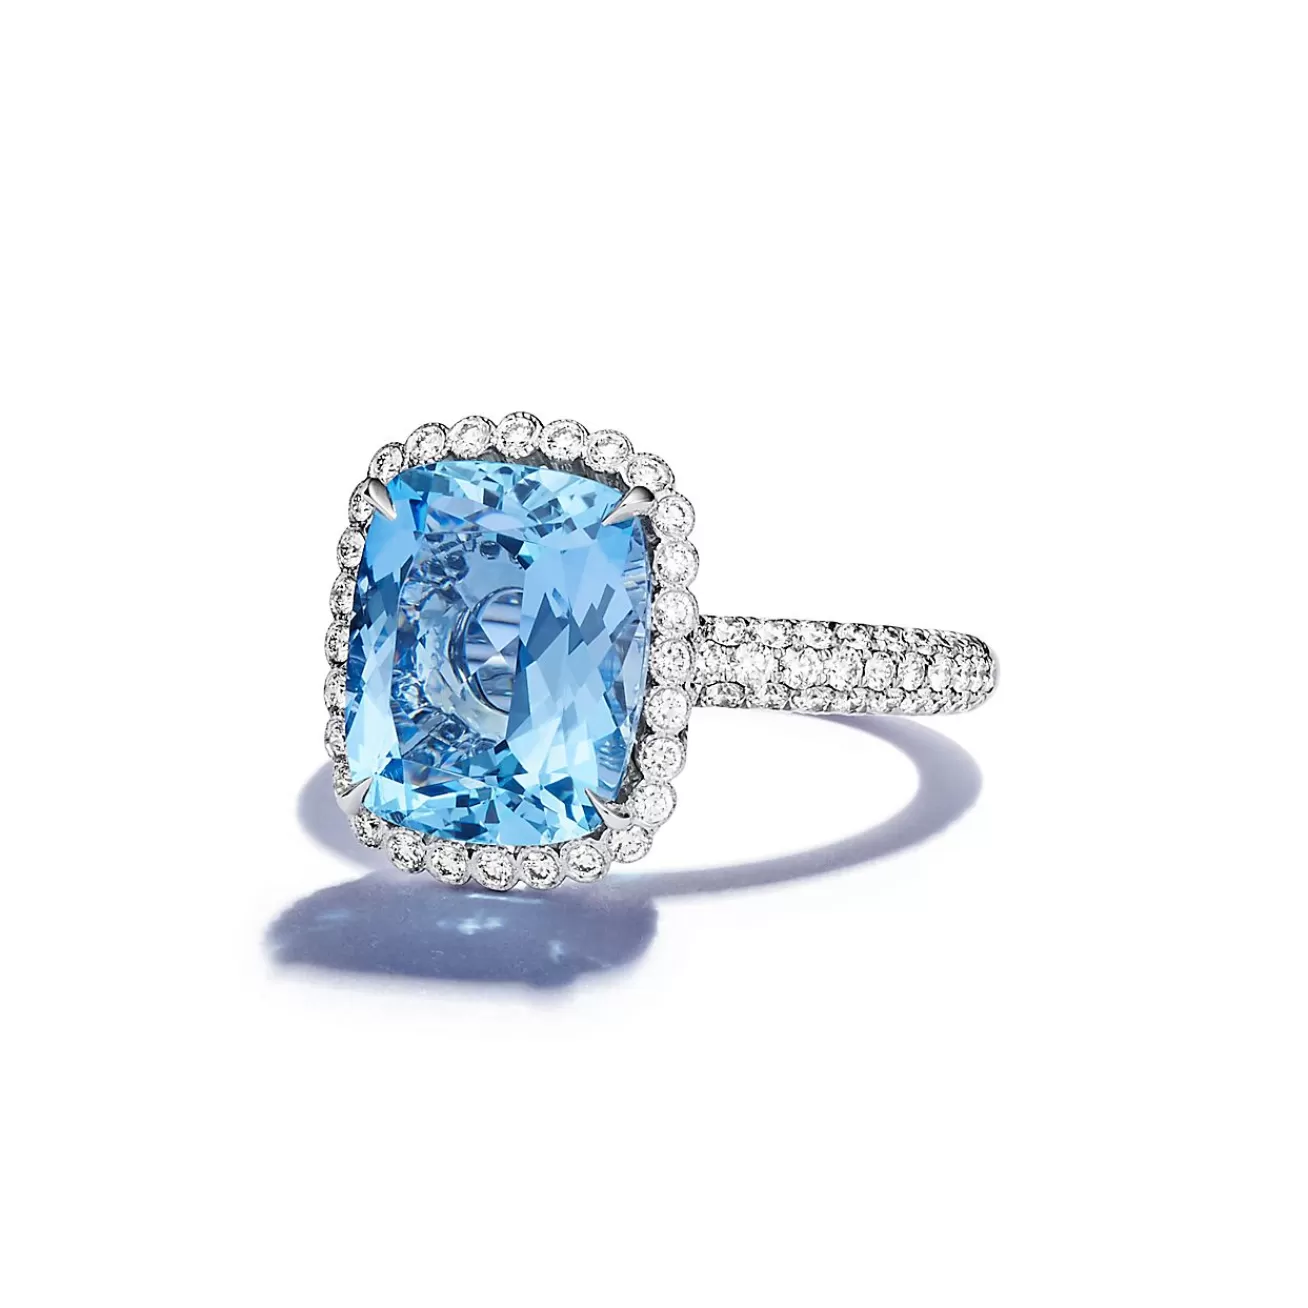 Tiffany & Co. Ring in Platinum with an Aquamarine and Diamonds | ^ Rings | Diamond Jewelry